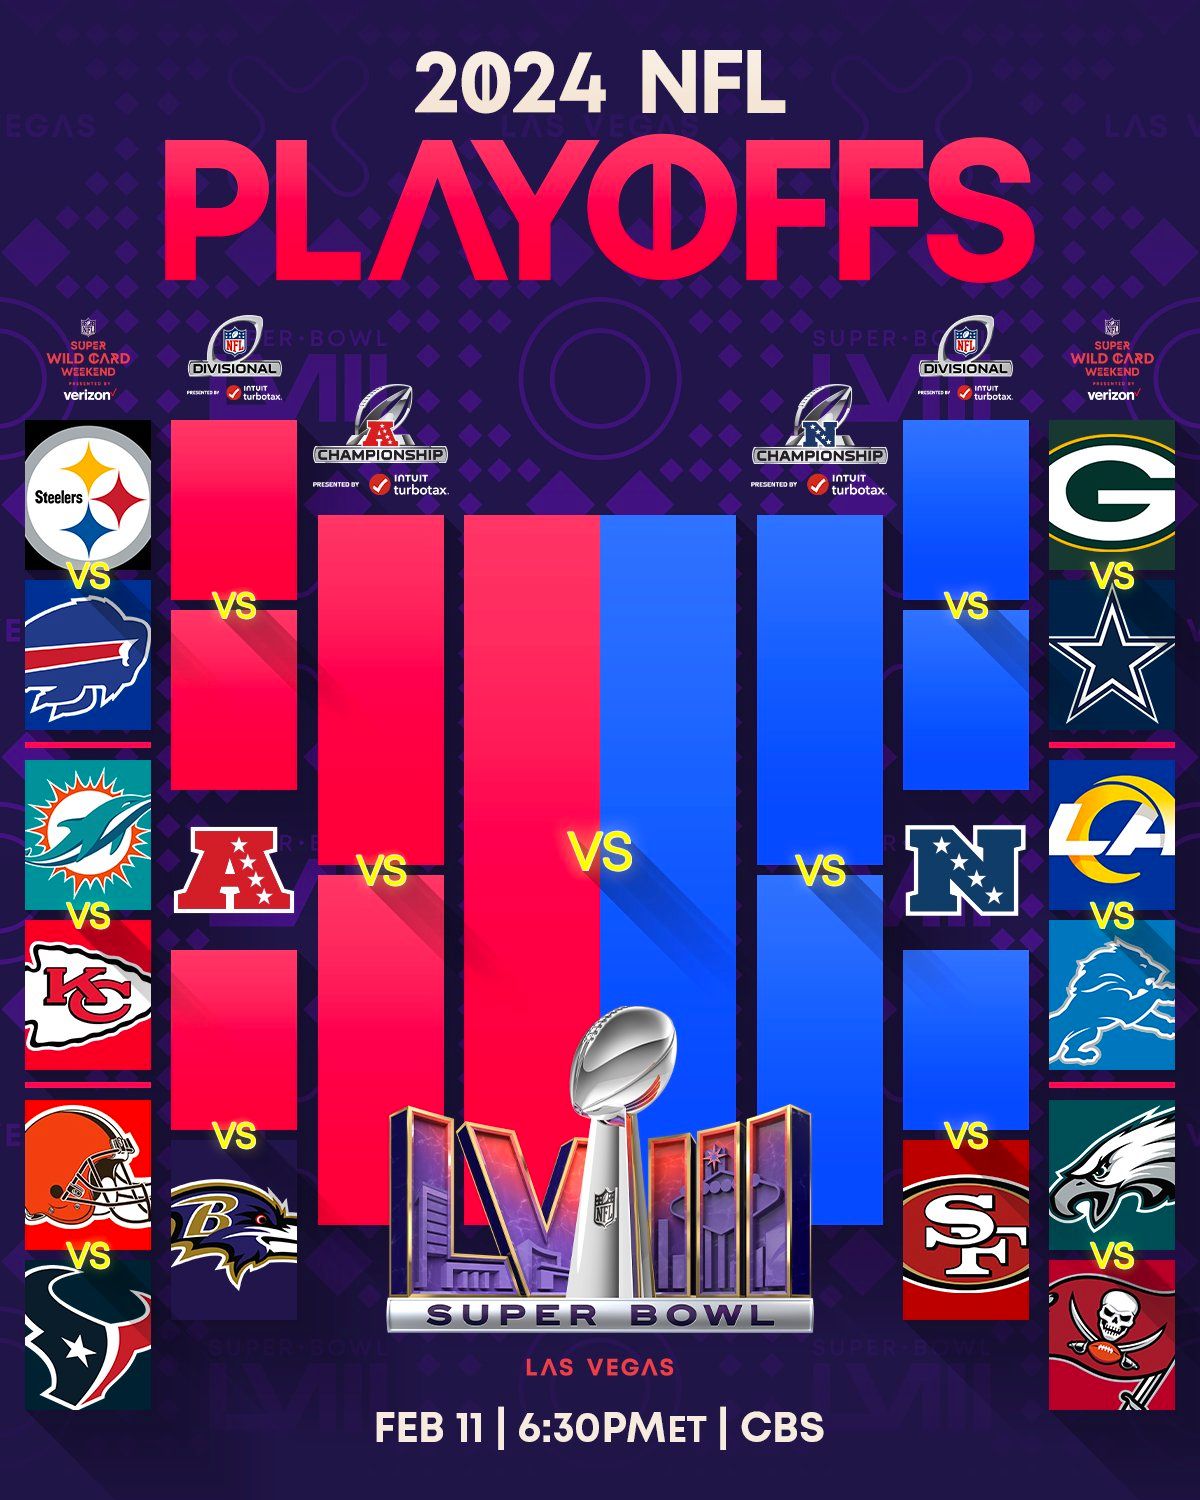 The road to Super Bowl LVIII